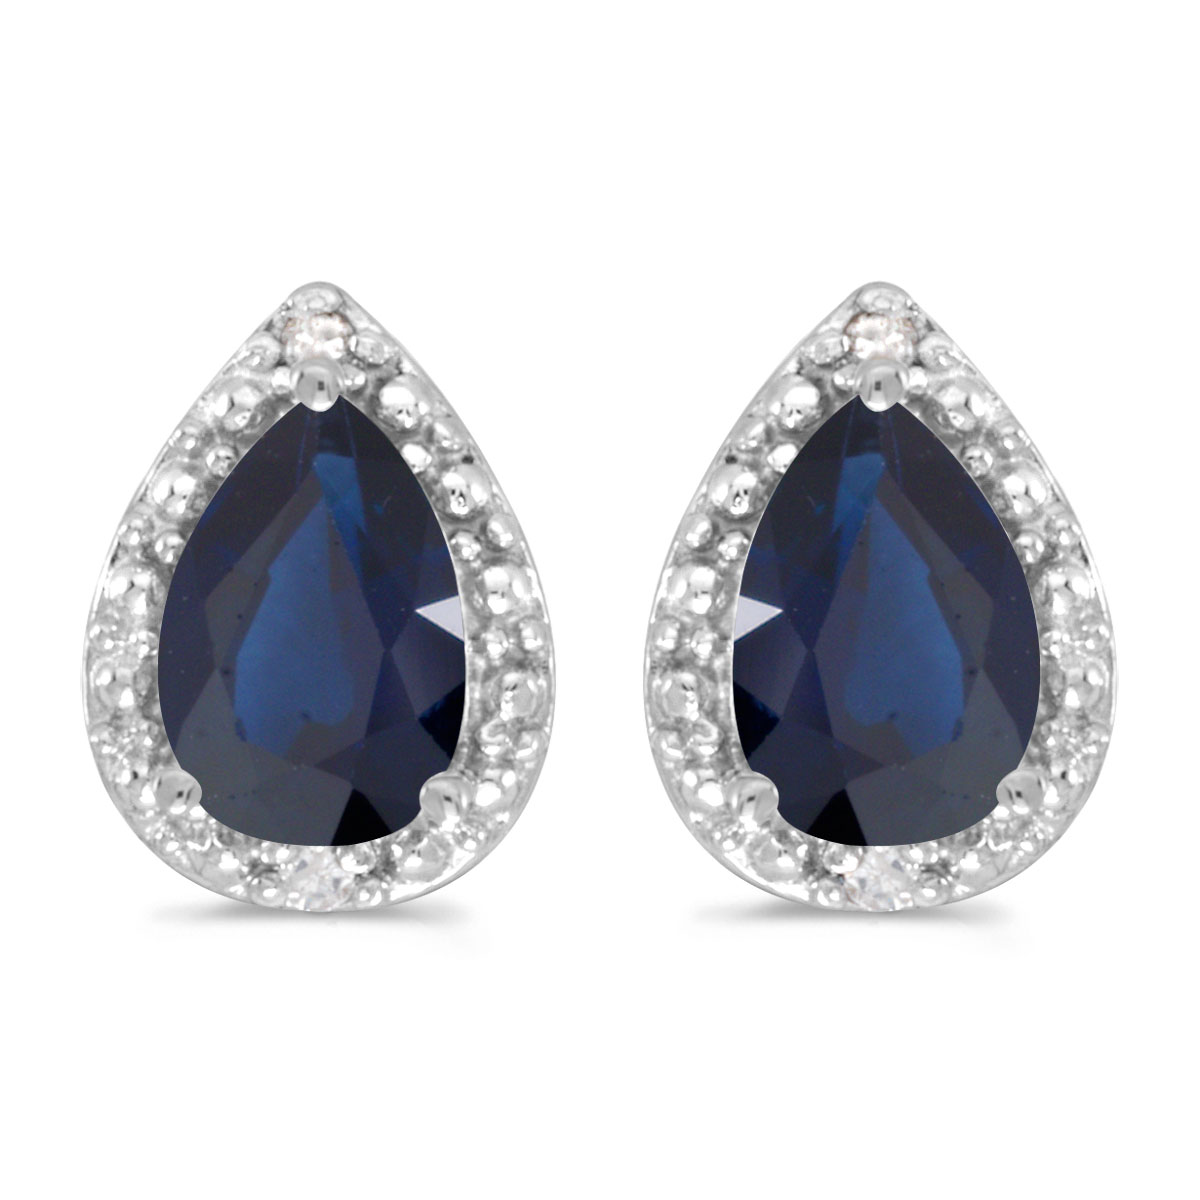 JCX2027: These 14k white gold pear sapphire and diamond earrings feature 6x4 mm genuine natural sapphires with a .90 ct total weight and sparkling diamond accents and .02 ct diamonds.